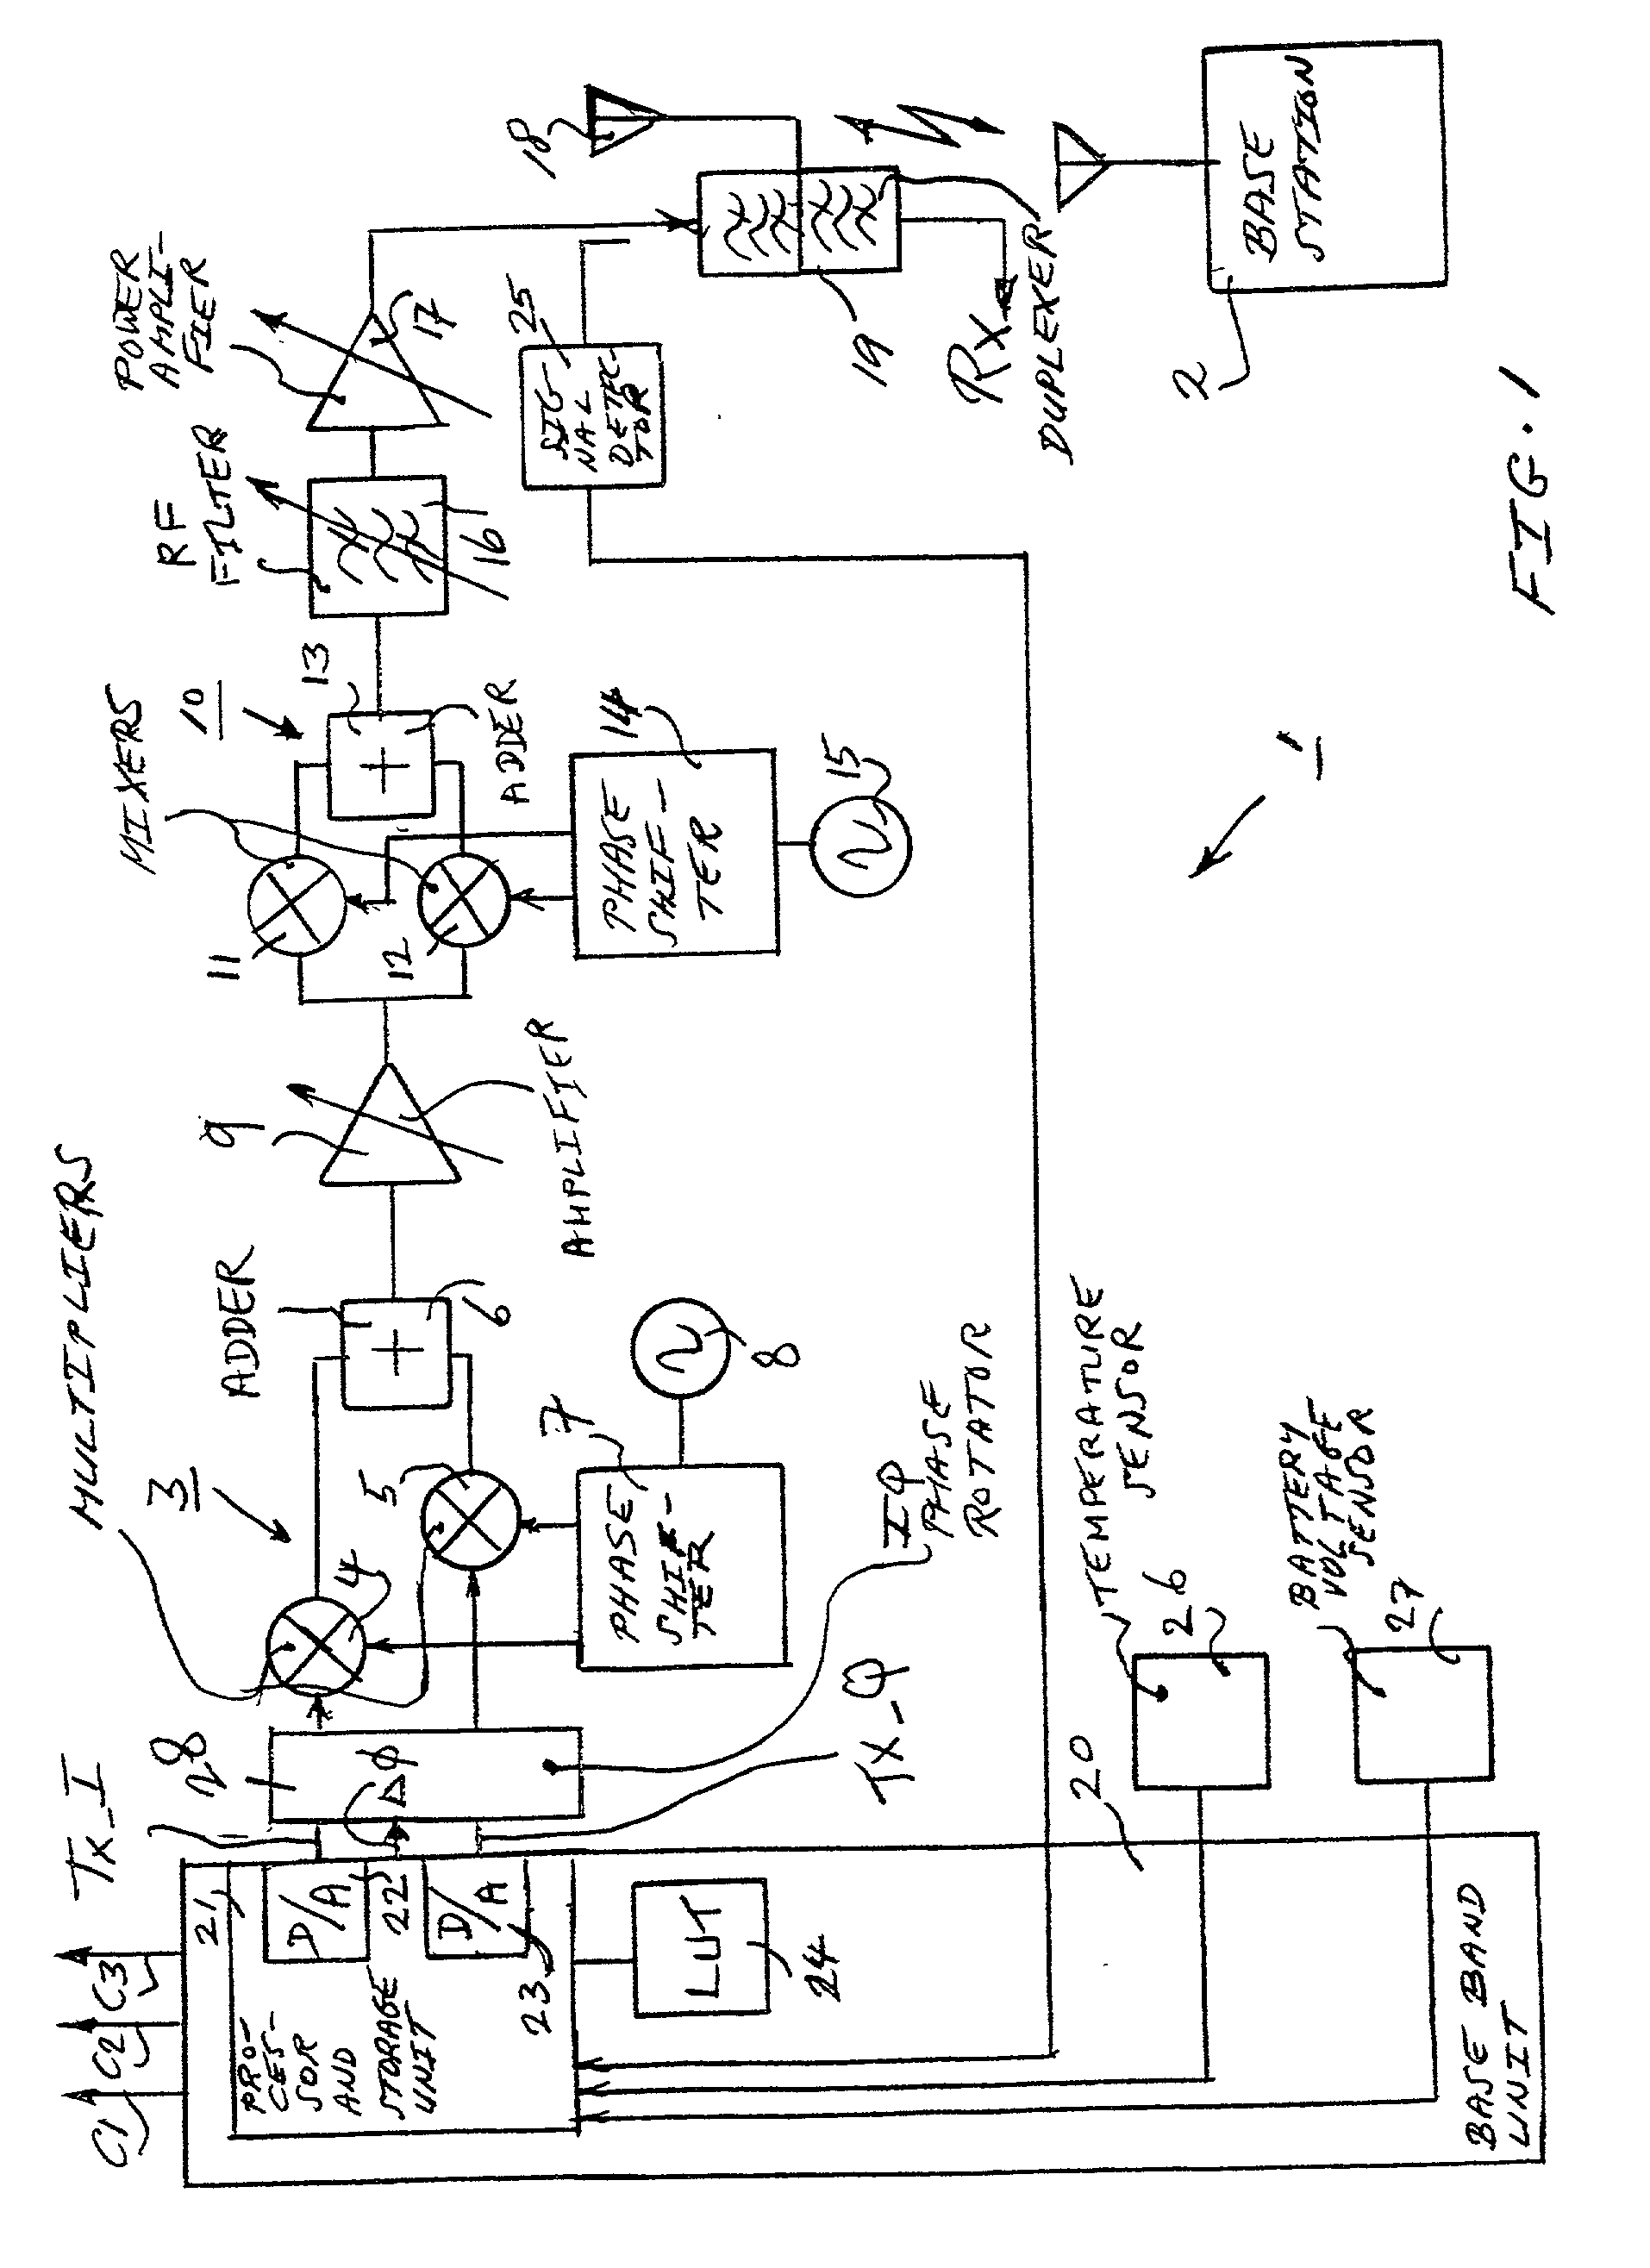 Transmitter with transmitter chain phase adjustment on the basis of pre-stored phase information